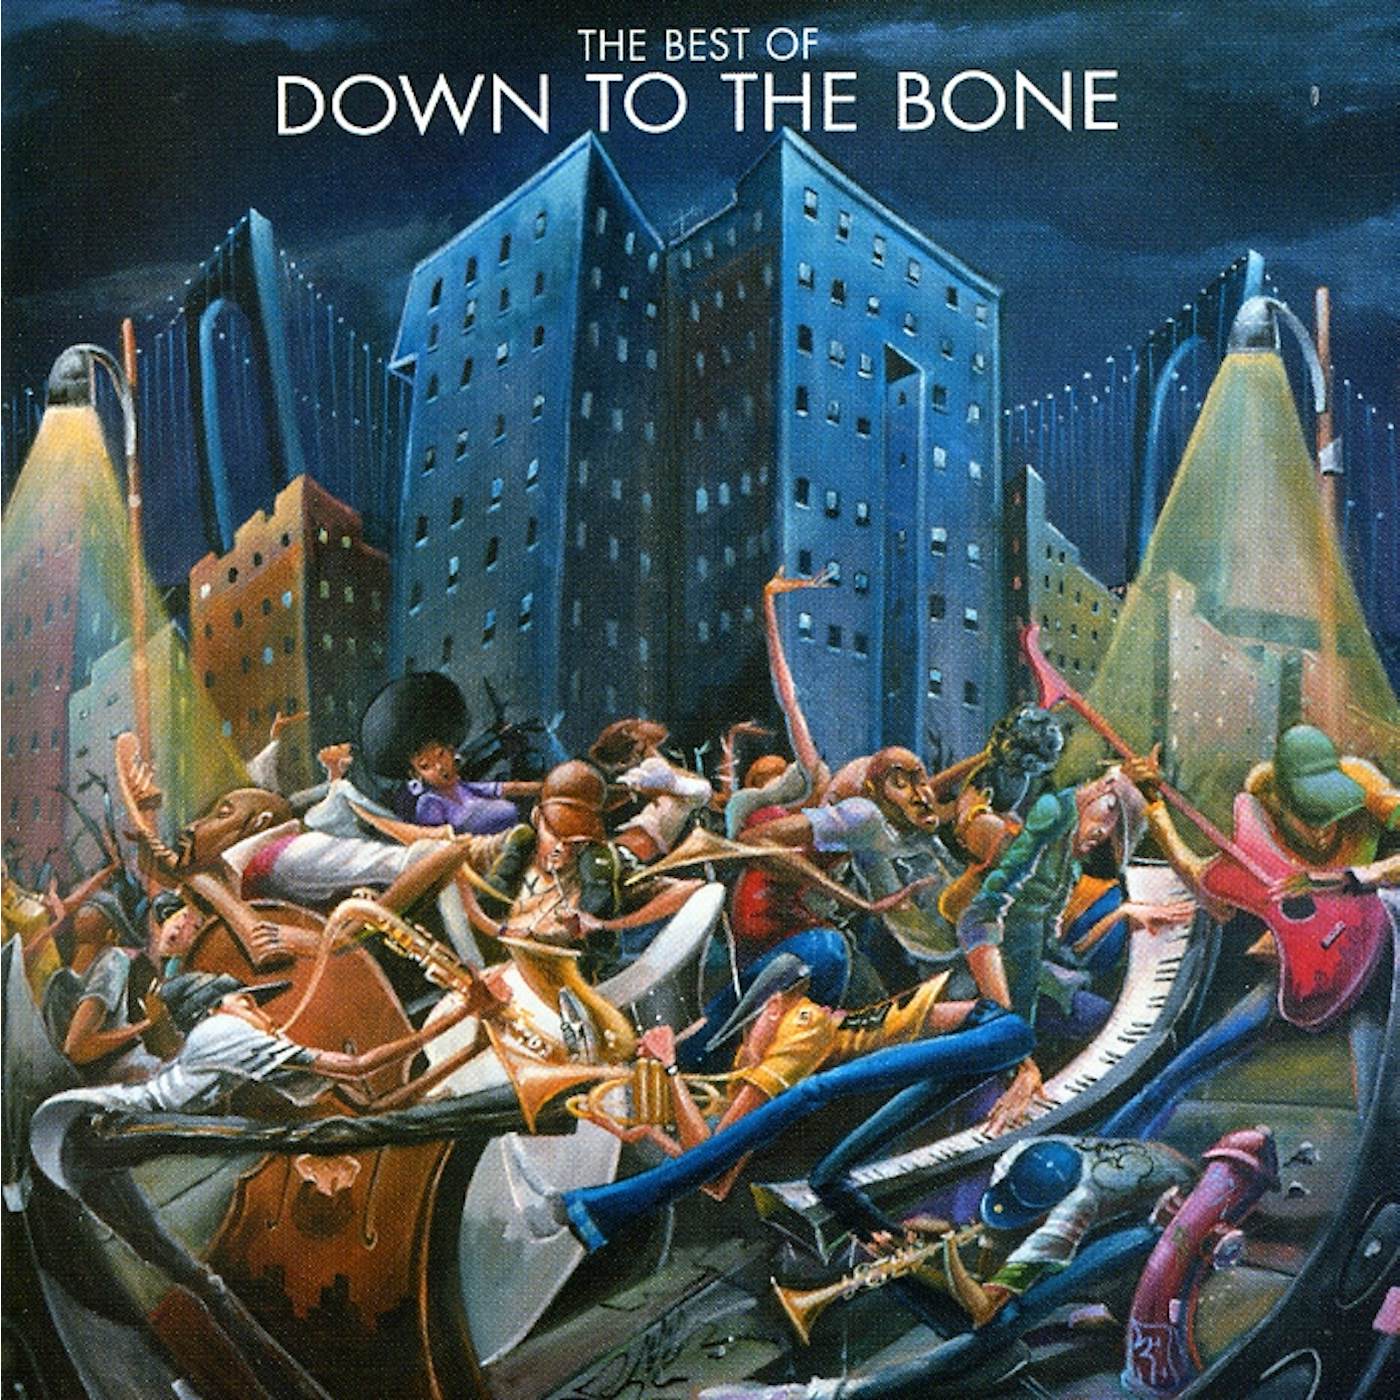 BEST OF DOWN TO THE BONE CD